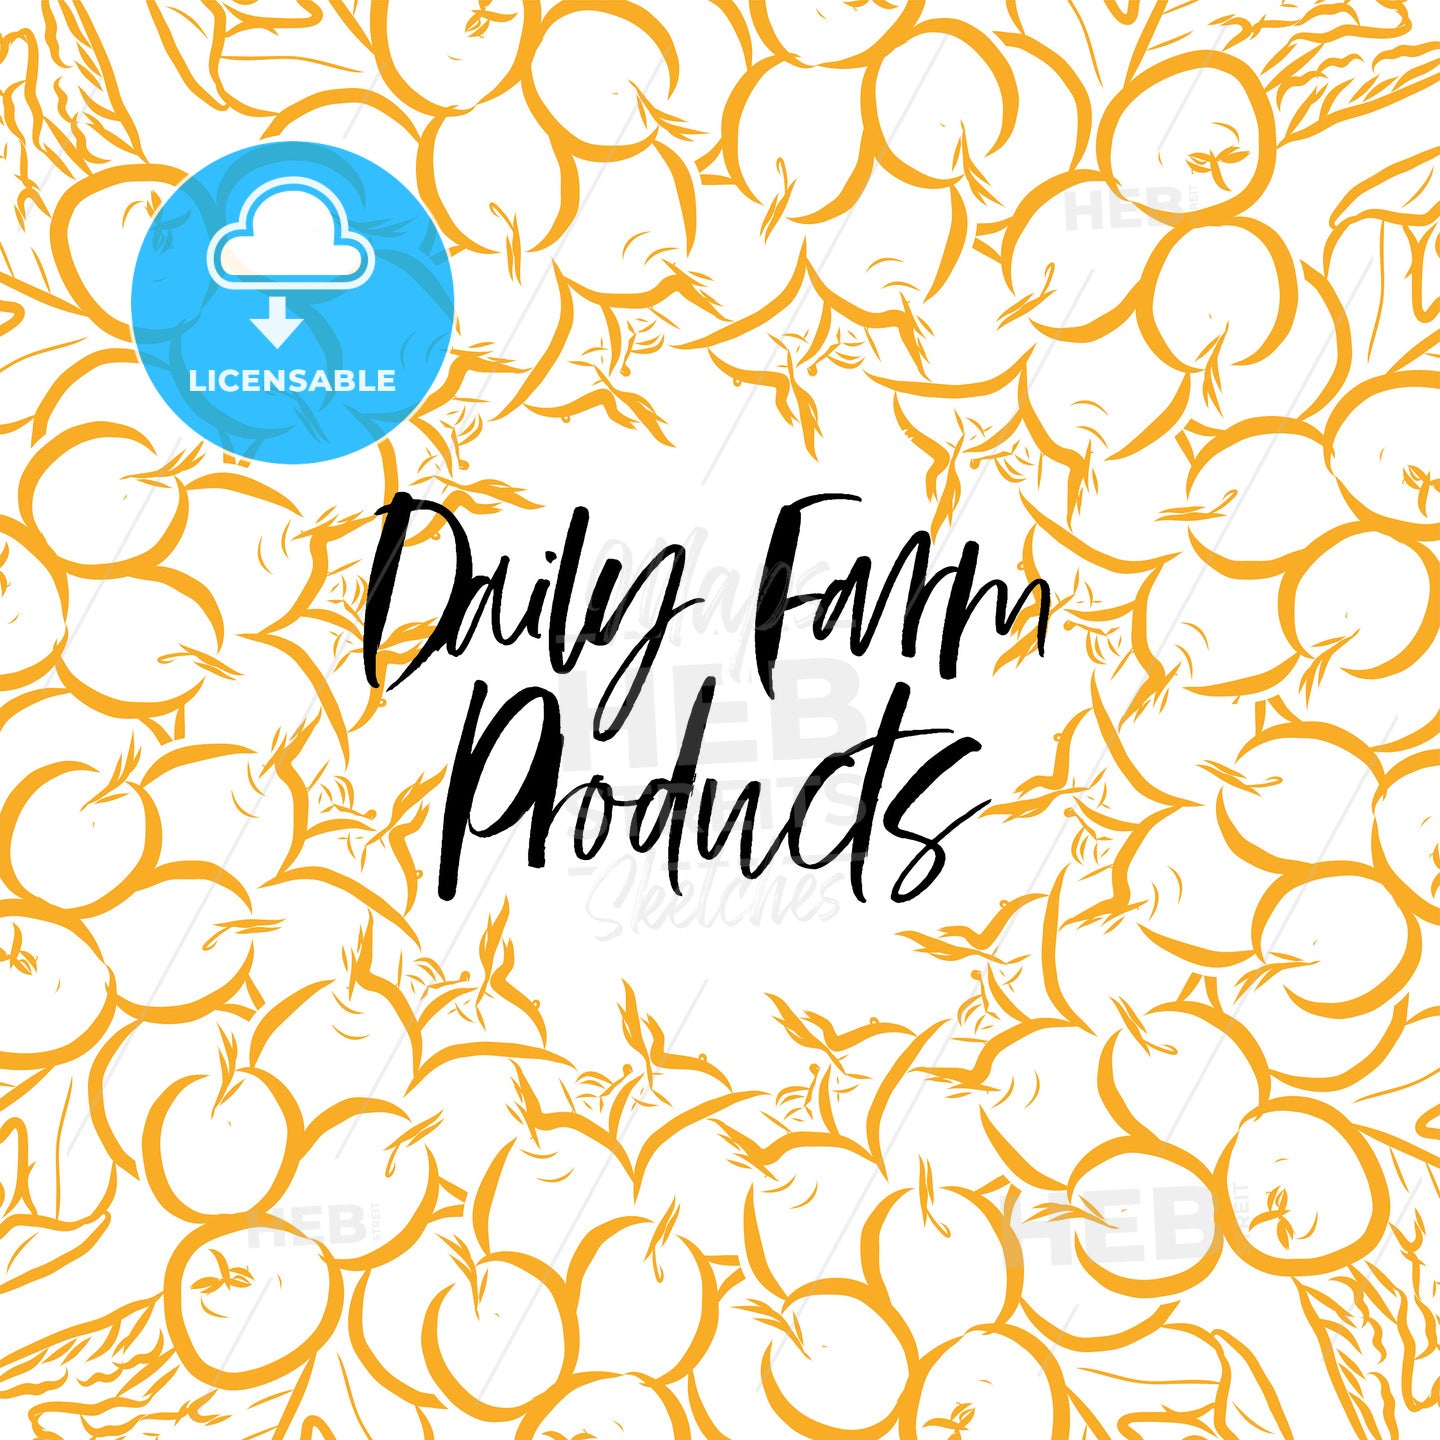 Daily Farm Products lettering on outlined Radishes banner template – instant download